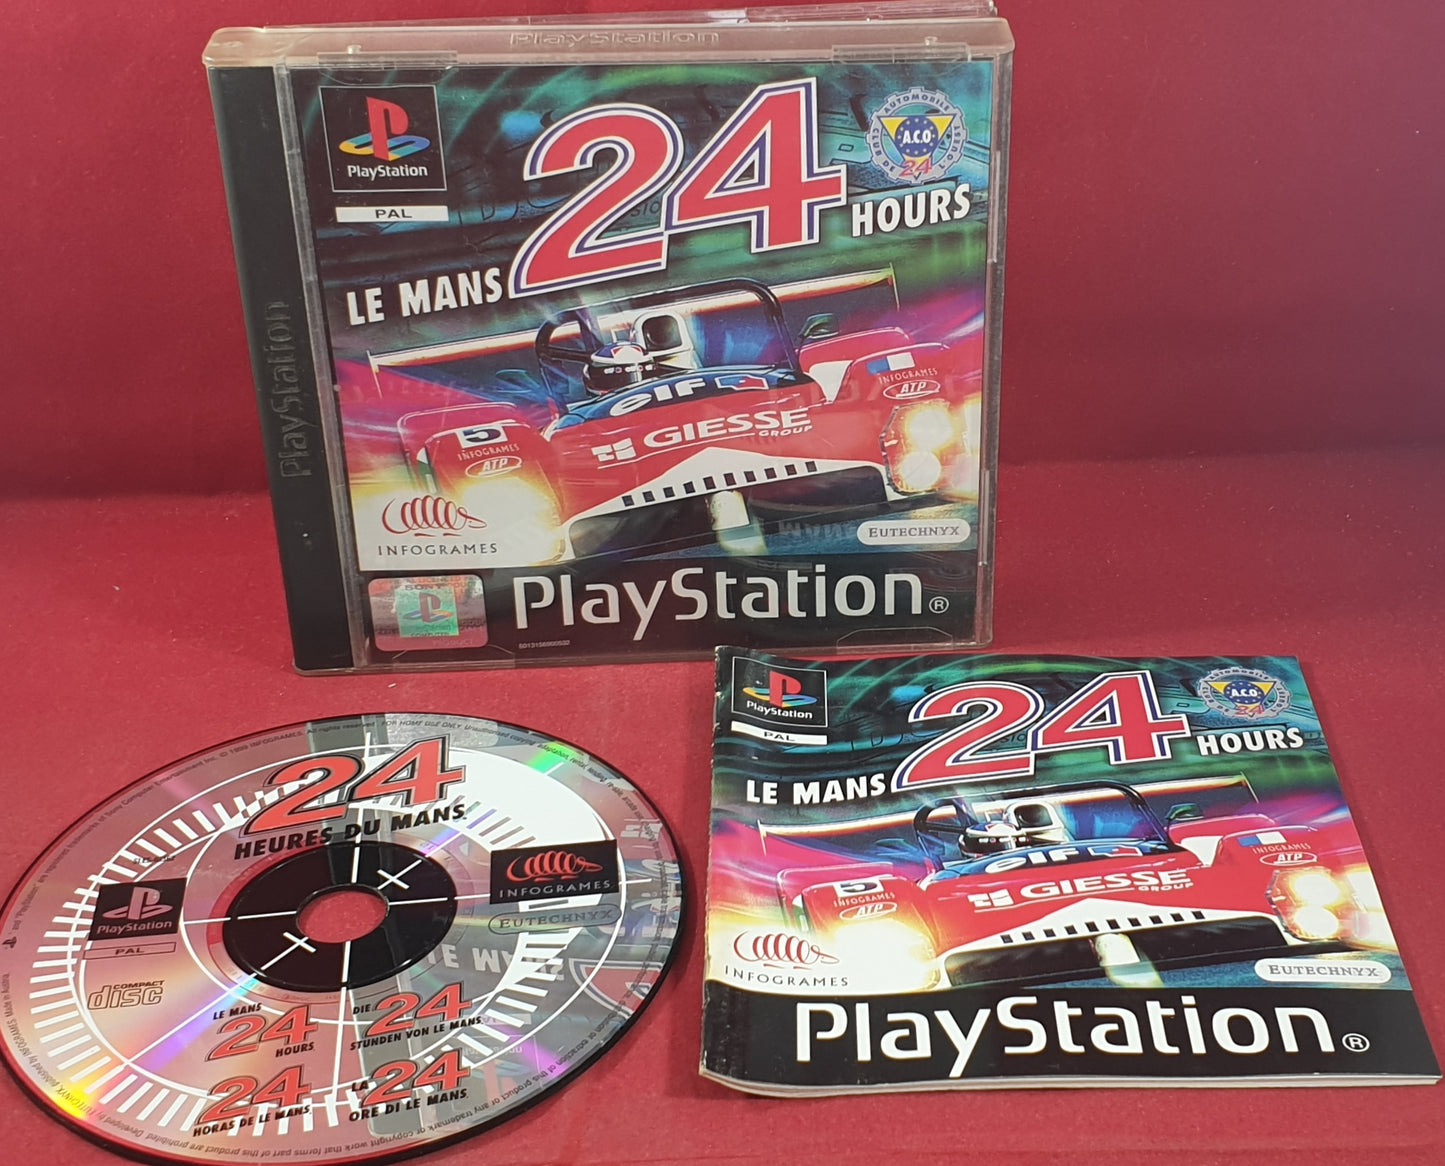 Le Mans 24 Hours AKA Test Drive Le Mans Sony Playstation 1 (PS1) Game